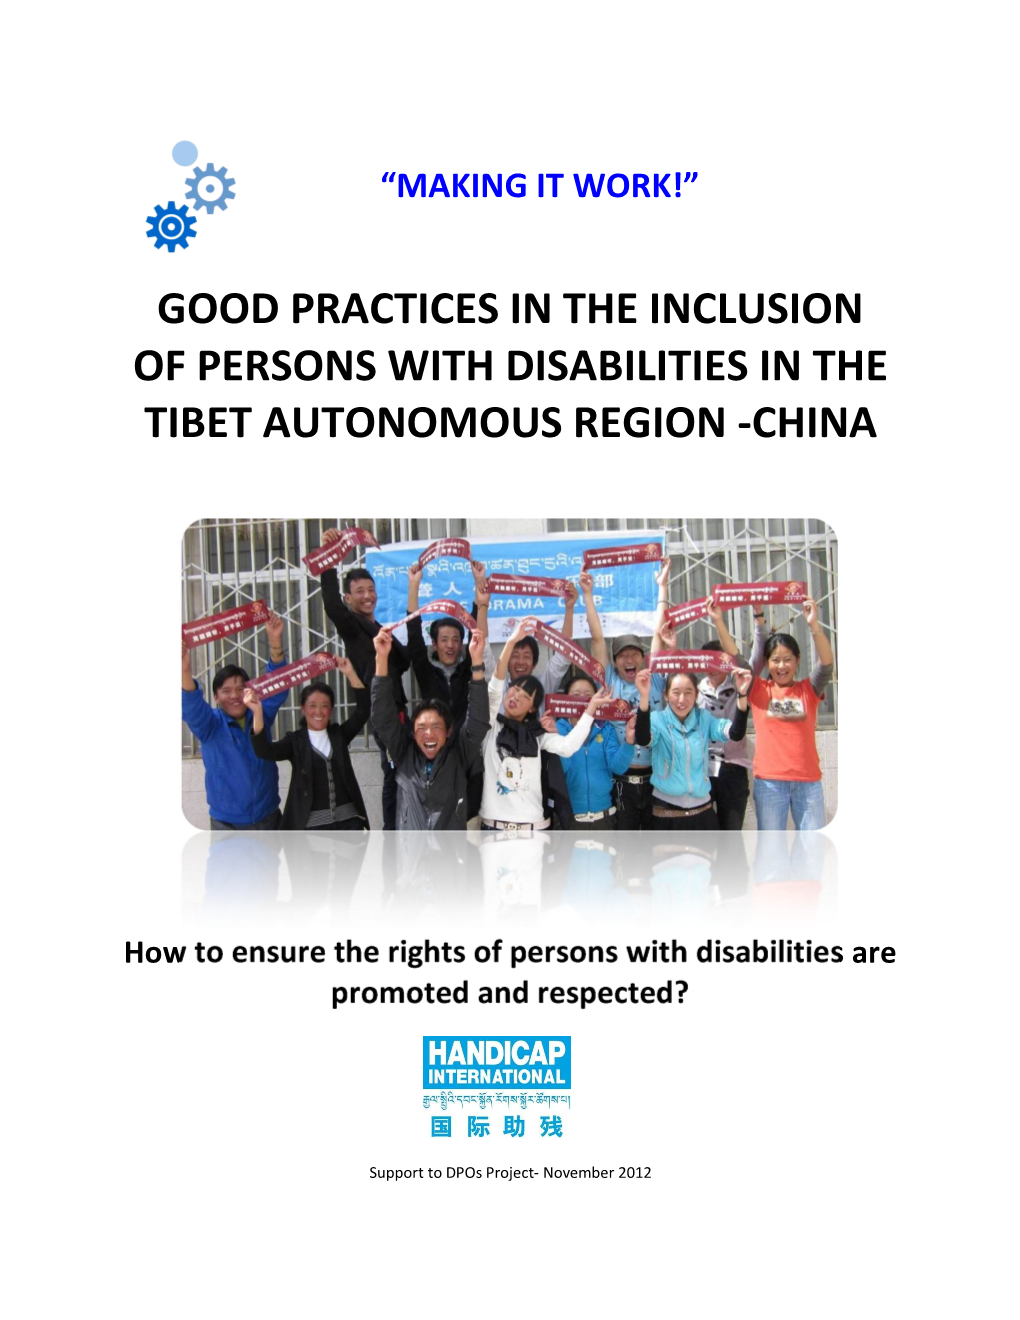 Good Practices in the Inclusion of Persons with Disabilities in the Tibet Autonomous Region -China